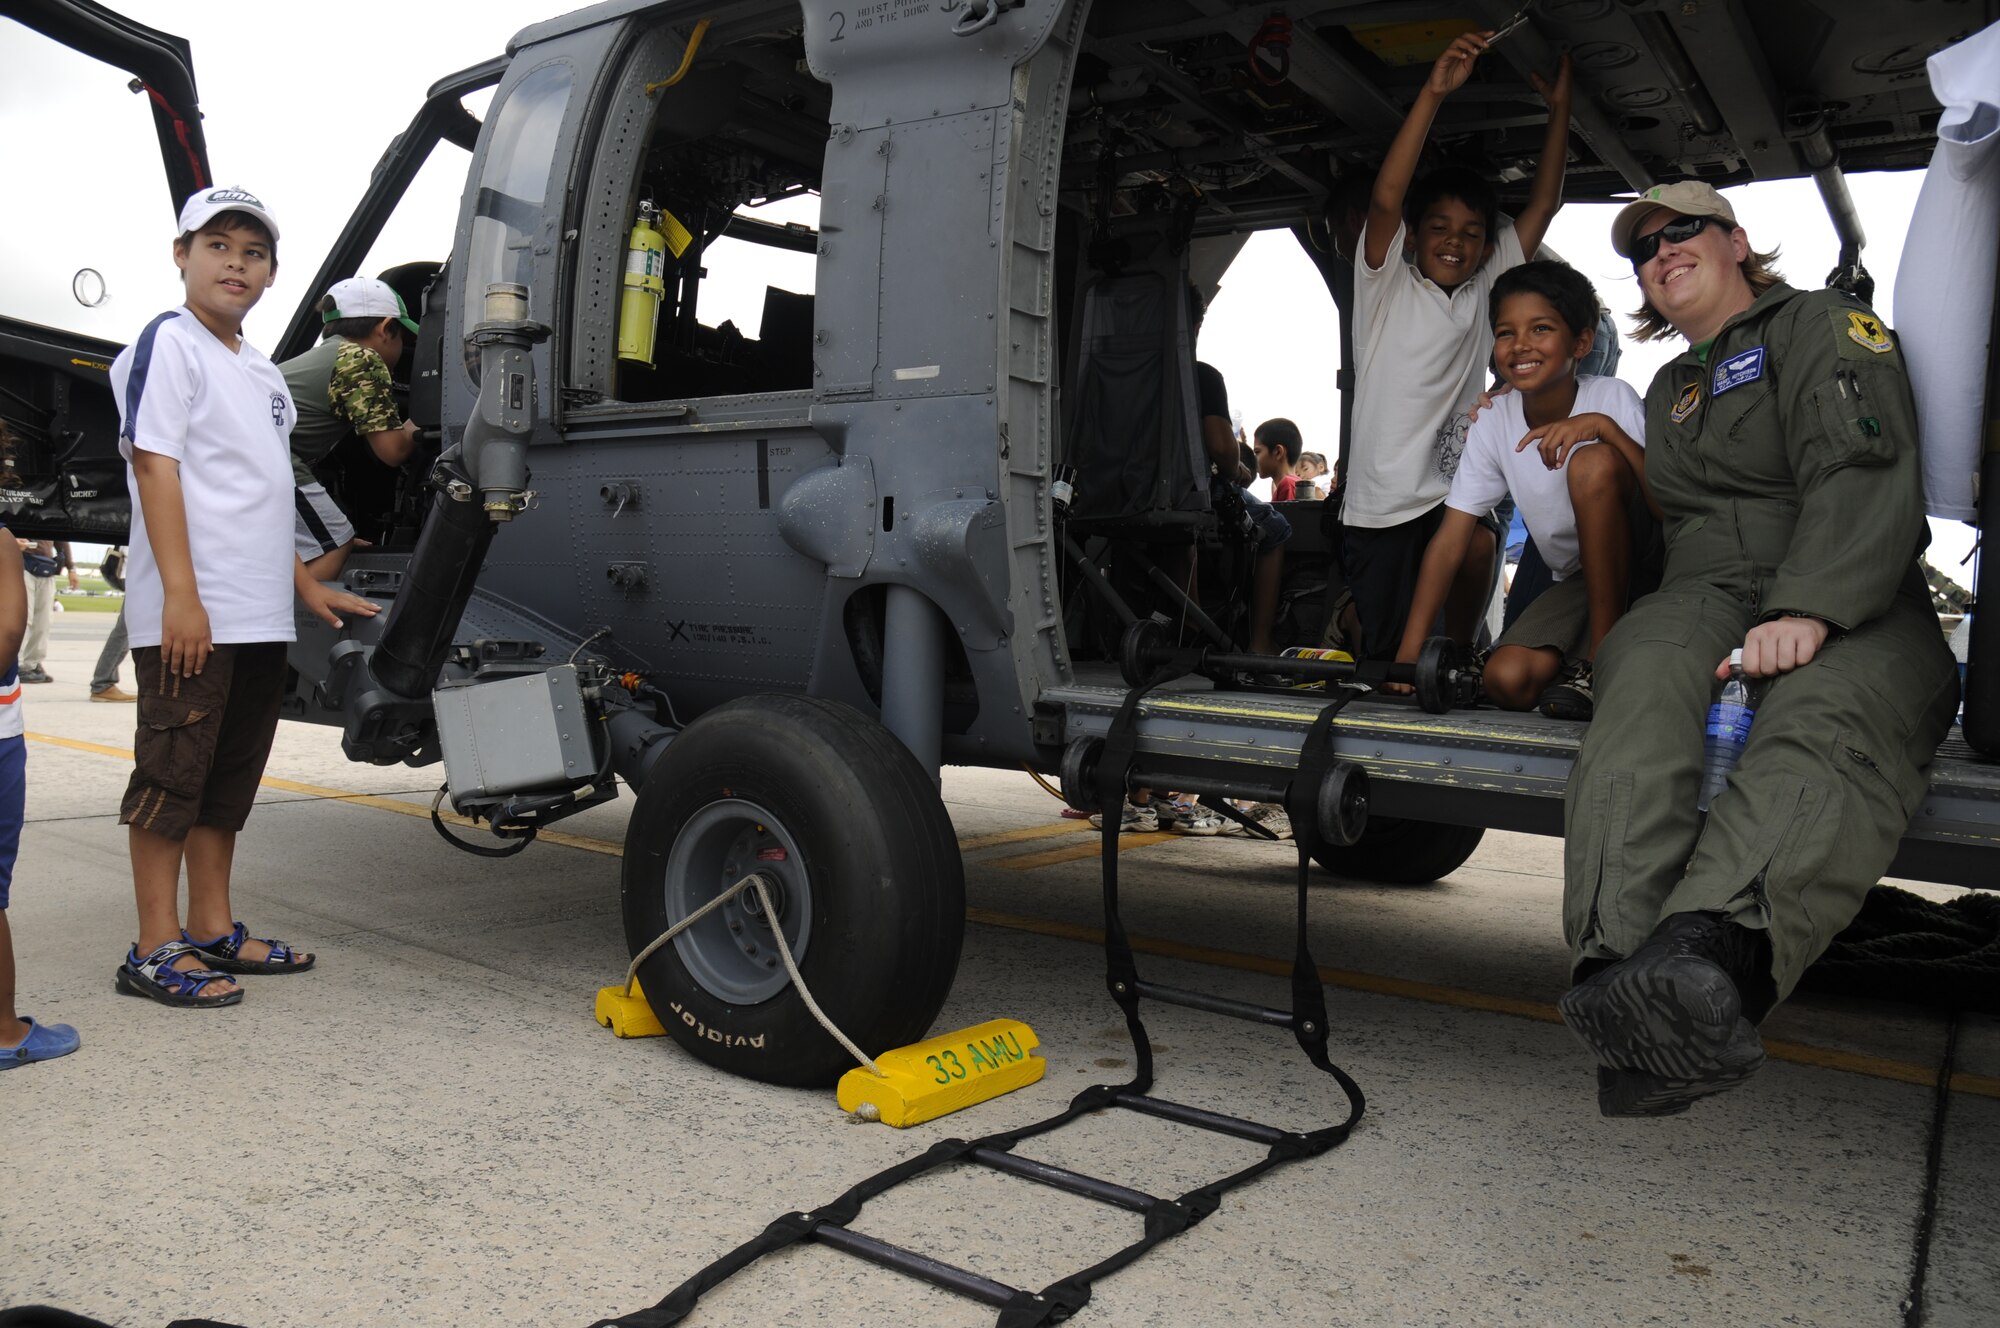 Capt. Amanda Hutchison, from the 18th Wing Safety Office, poses with children for a photo on an HH-60 helicopter during Americafest 09' at Kadena Air Base, Japan, July 4. (U.S. Air Force Photo/Airman 1st Class Chad Warren)         